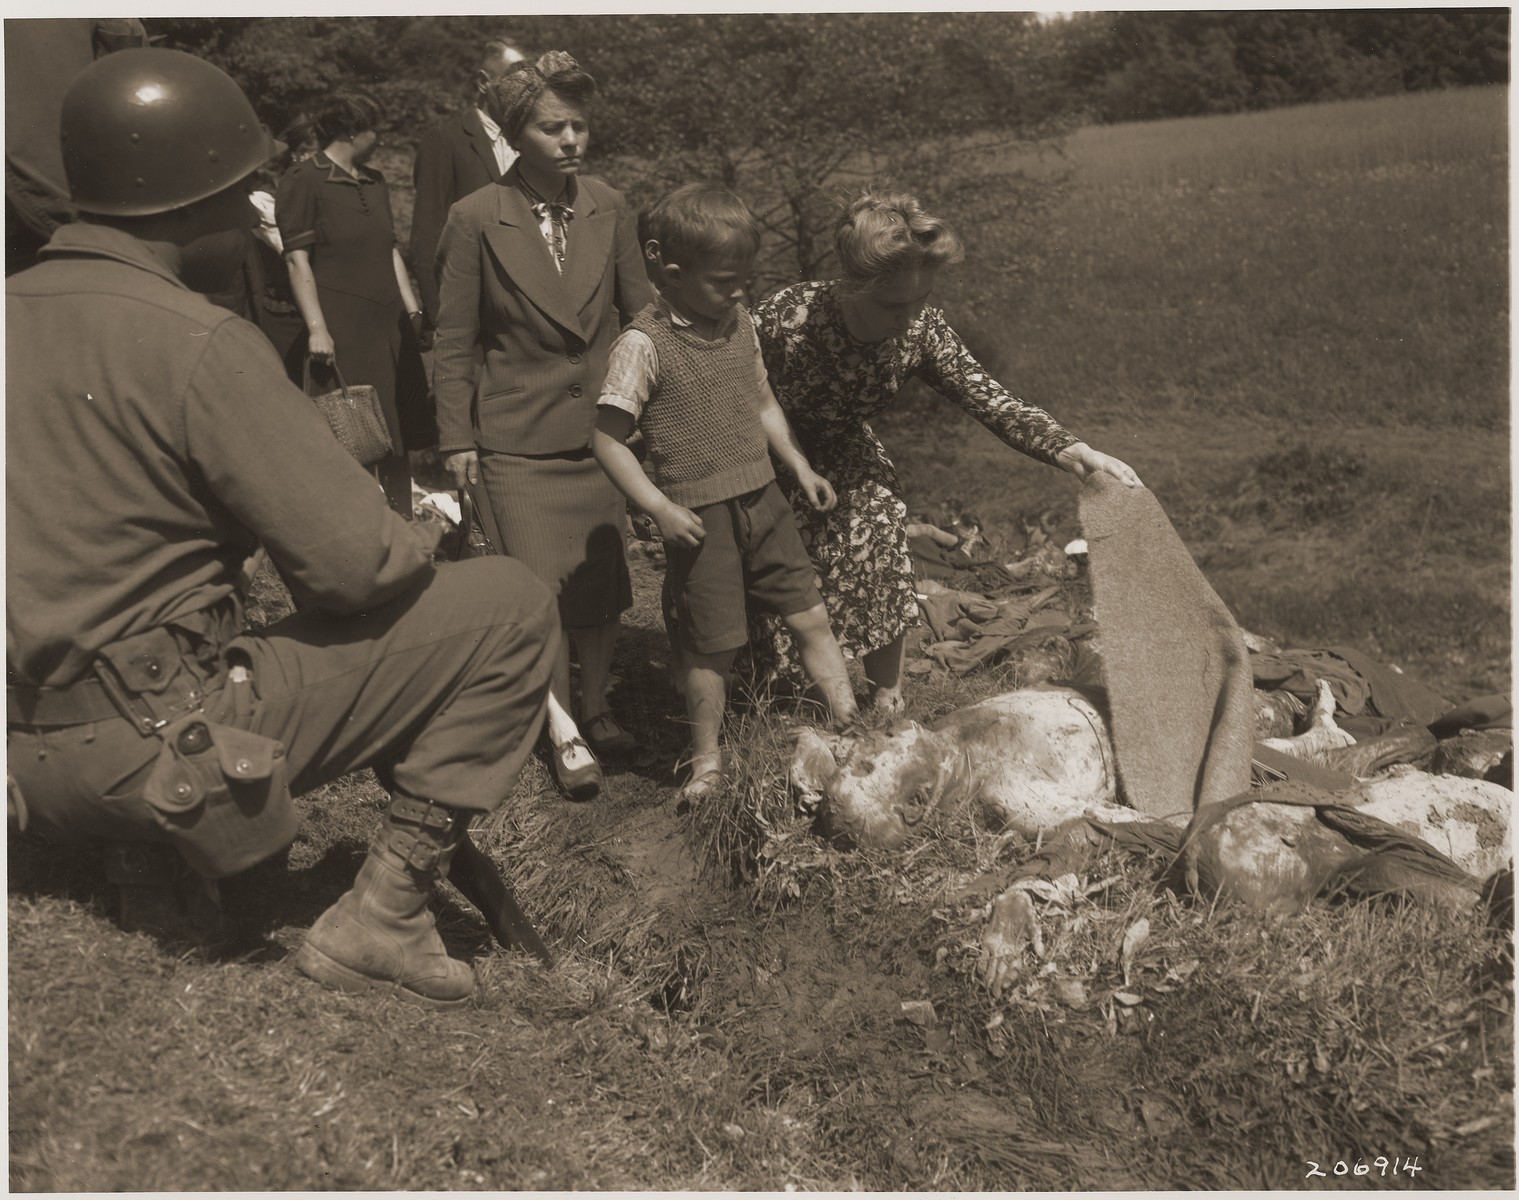 German civilians are forced to see the bodies of prisoners exhumed from a mass grave near Nammering.  

An African- American soldier observes the procession of German civilians.